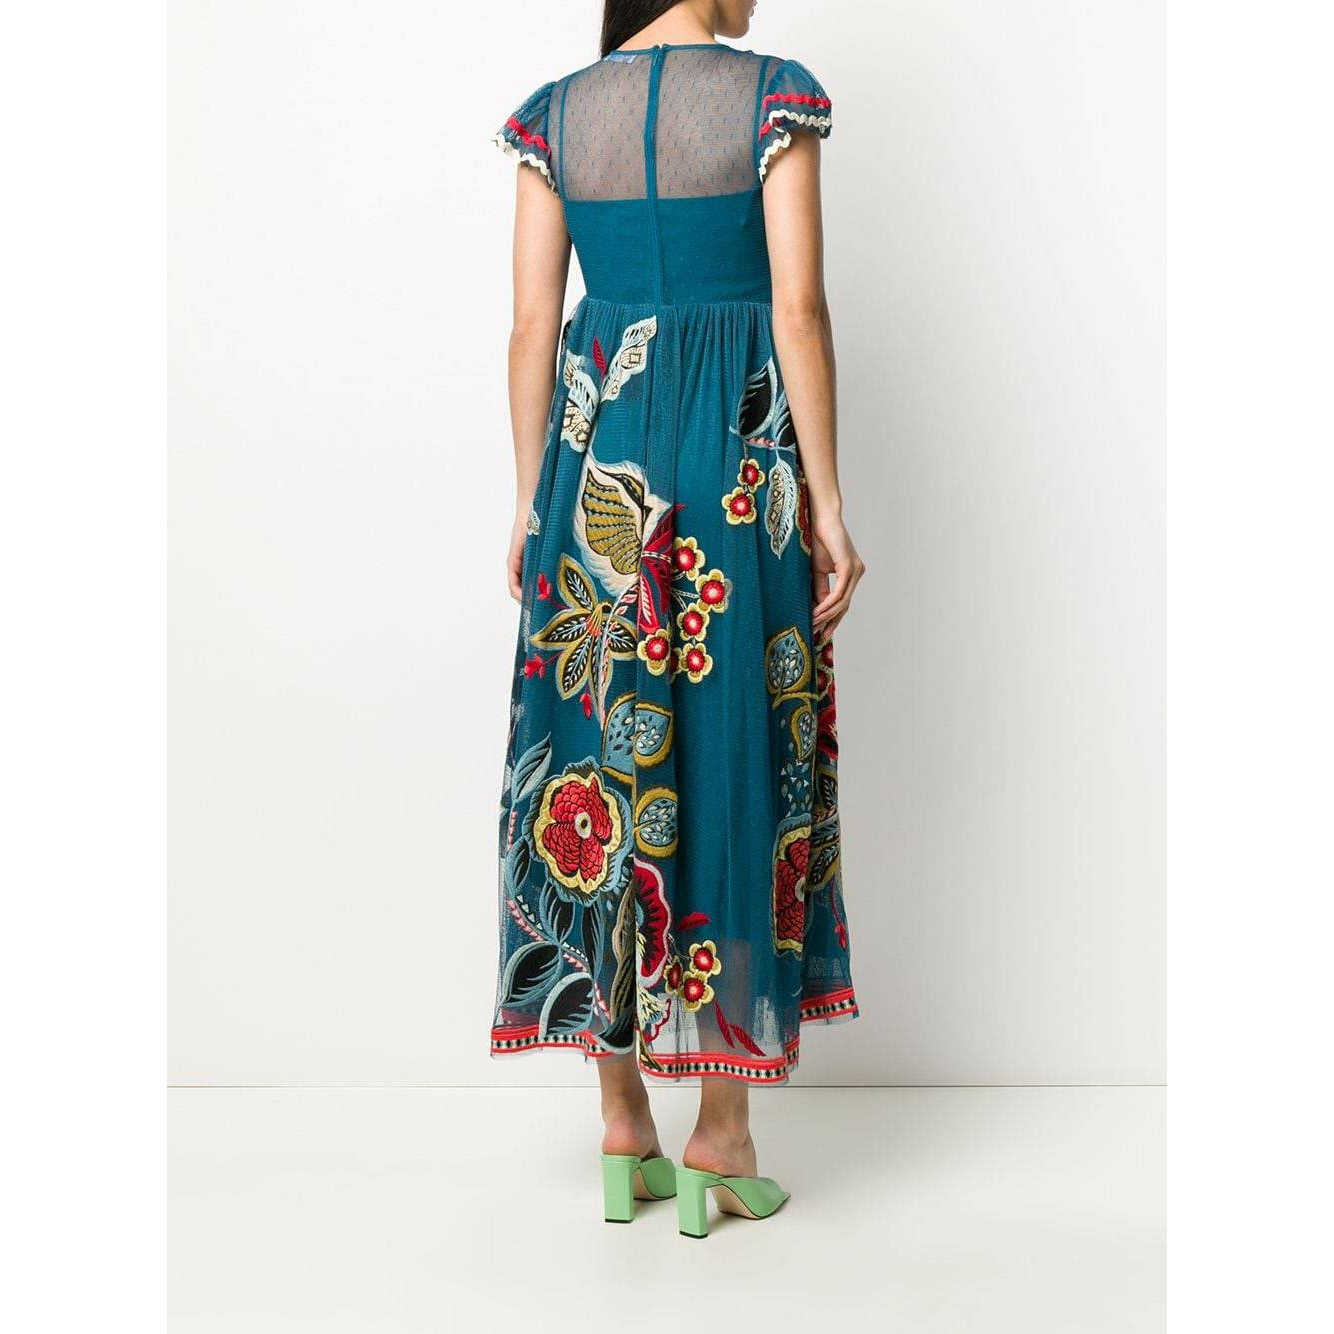 FLORAL-EMBROIDERED MESH DRESS - Yooto